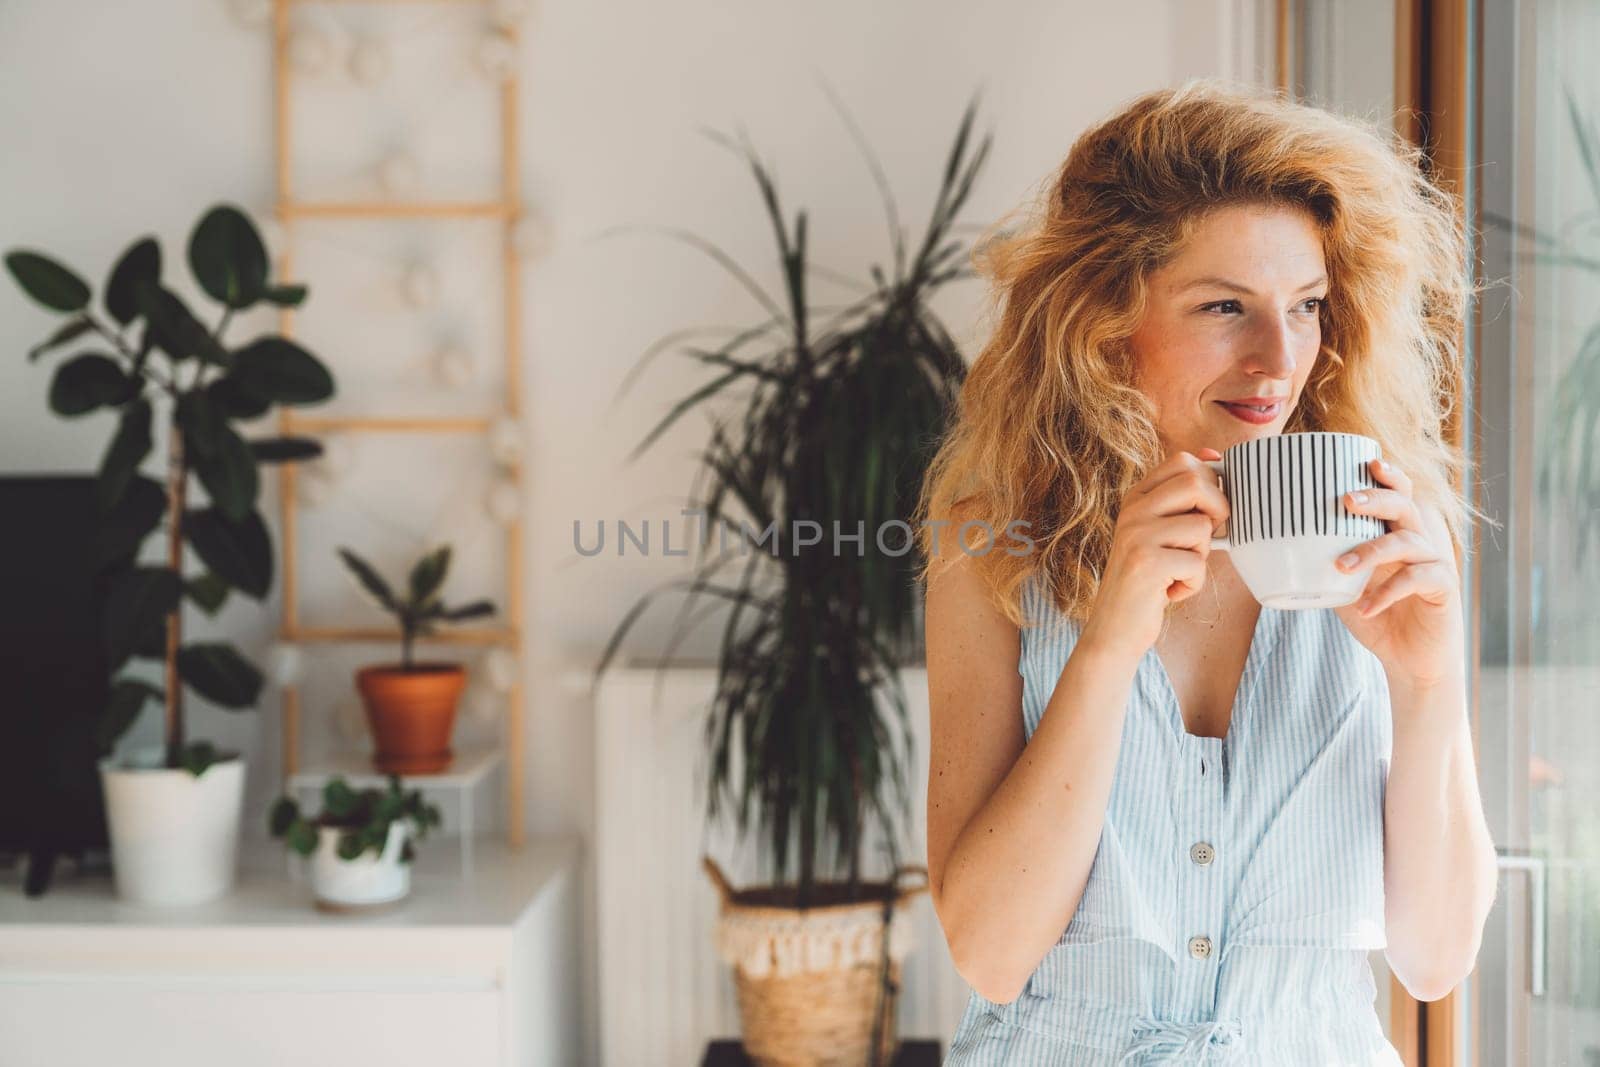 Waist up portrait woman with blonde curly hair holding a cup of tea standing by the window looking out, plants in the background by VisualProductions